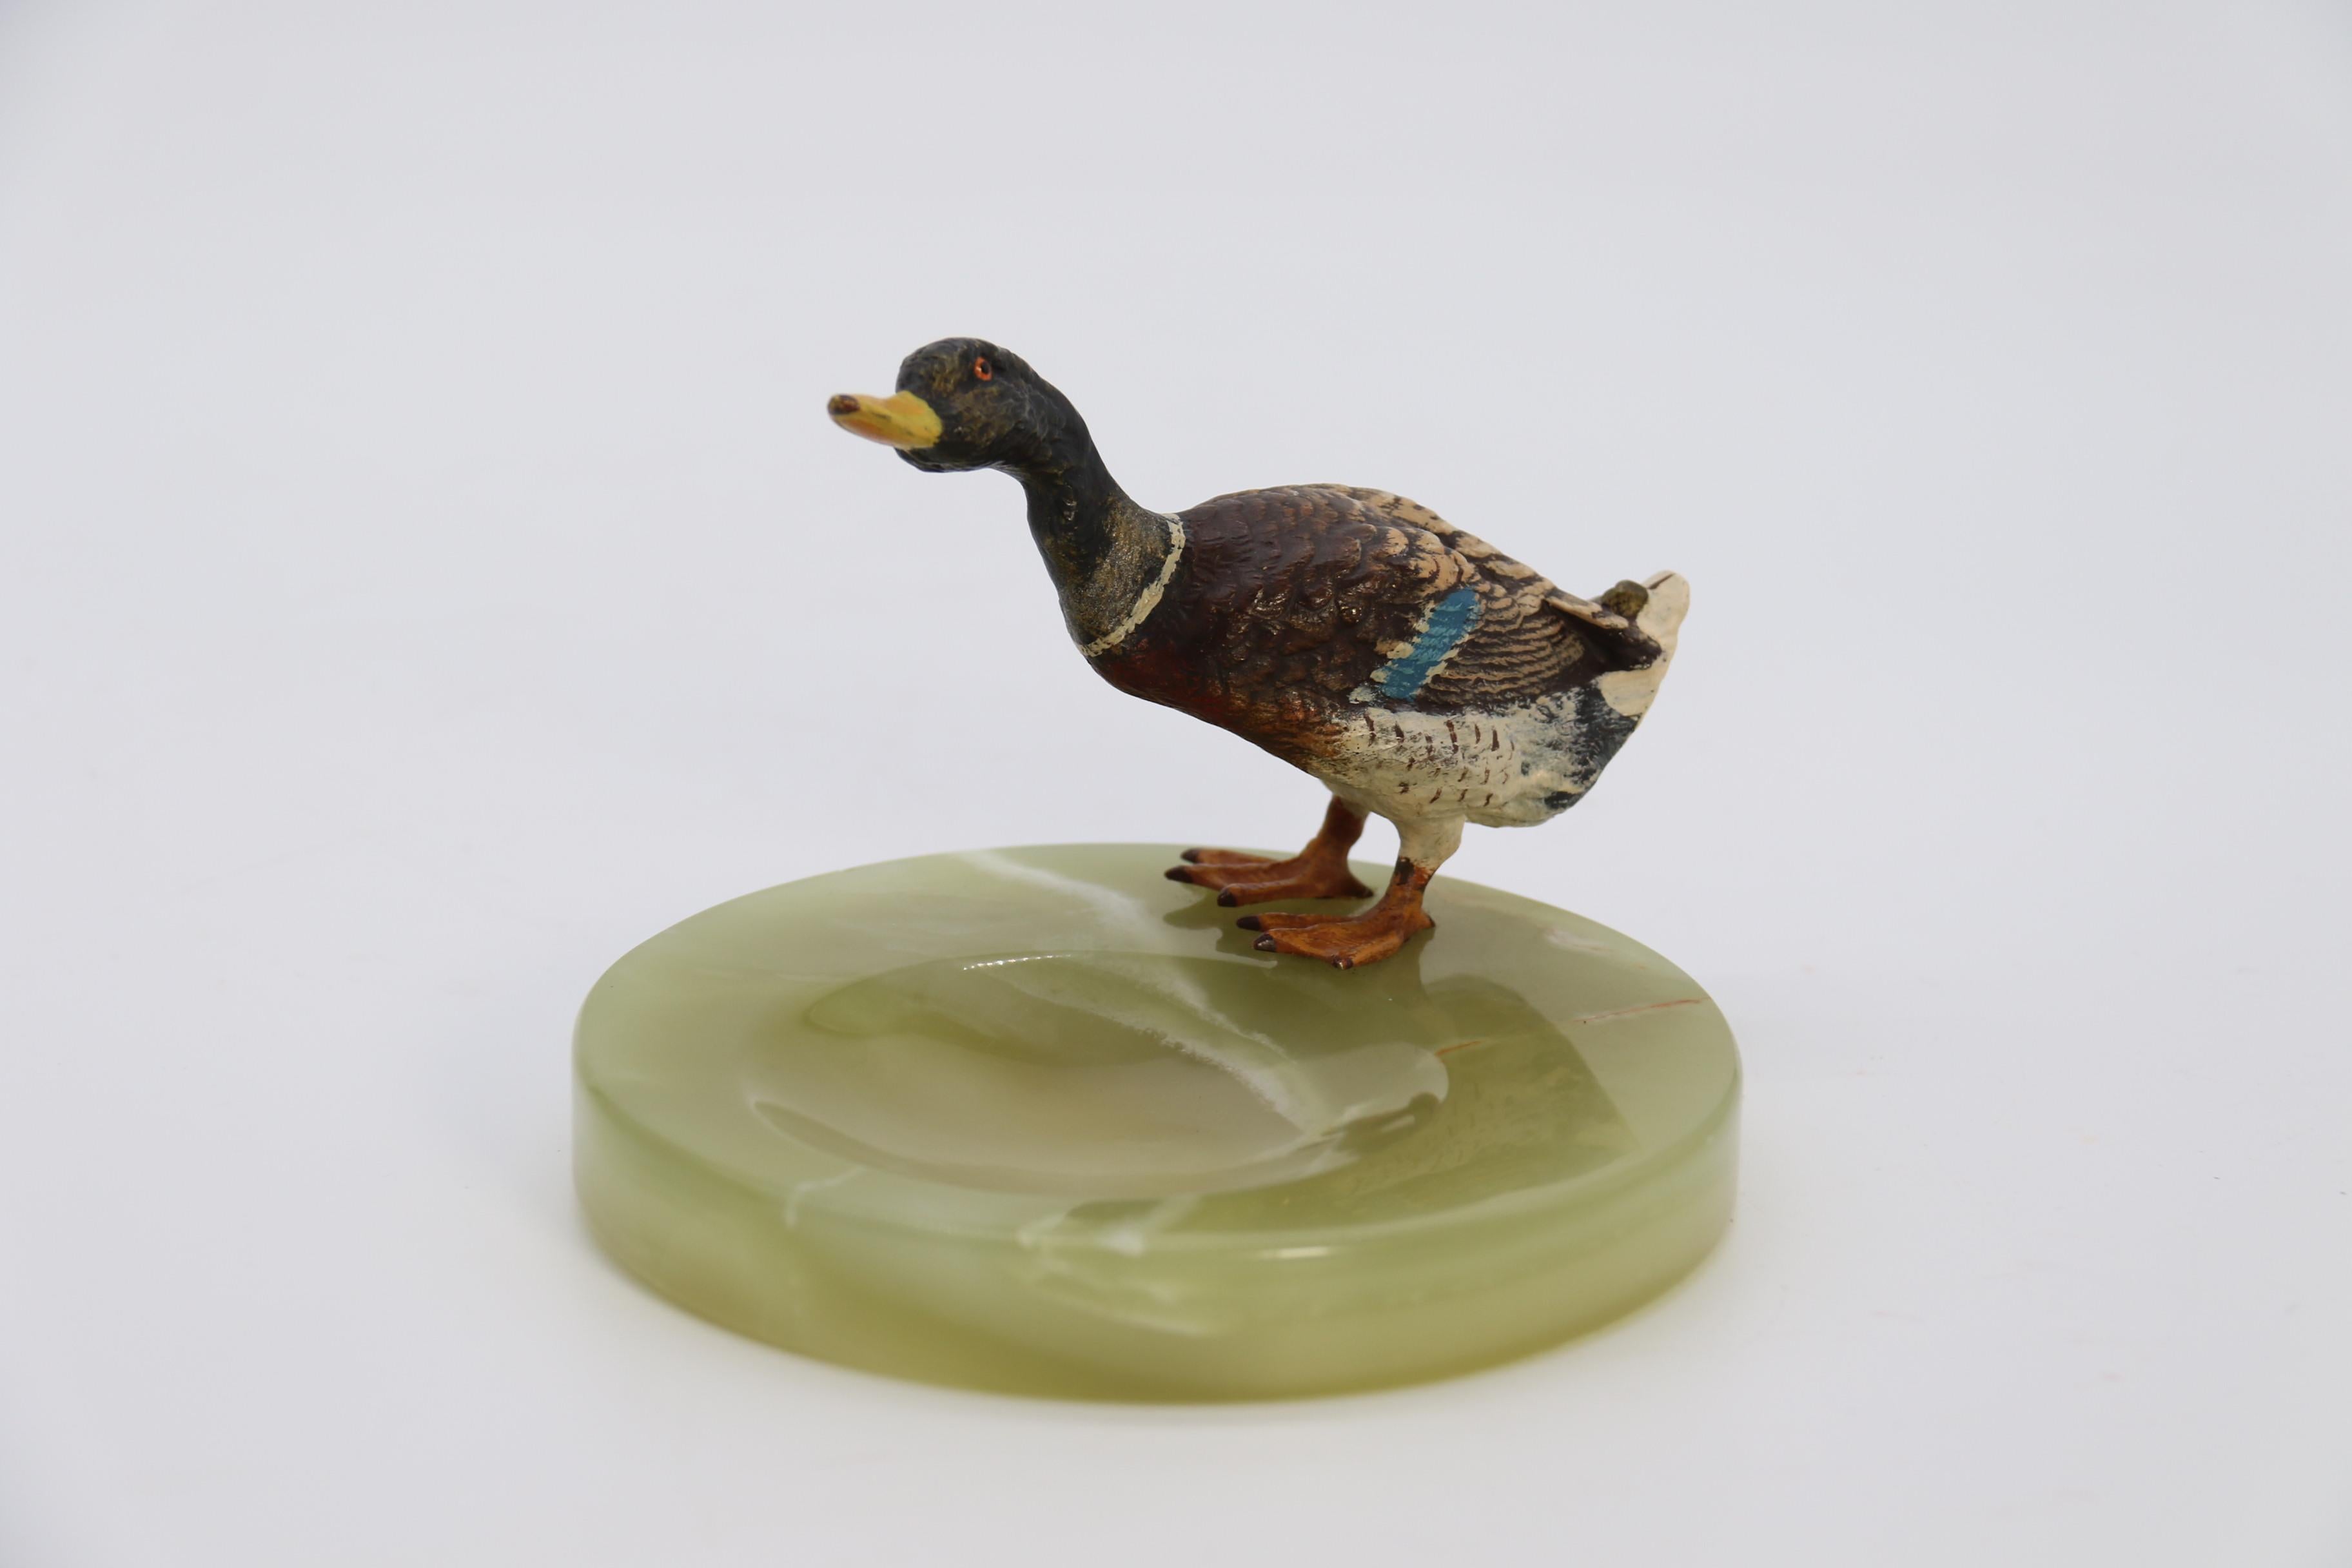 An Austrian cold painted bronze study of a drake mallard duck drinking

This fine bronze study of drake mallard duck was produced in Austria, circa 1930. It is very well modelled and finely hand painted it retains all of its original paint in rich